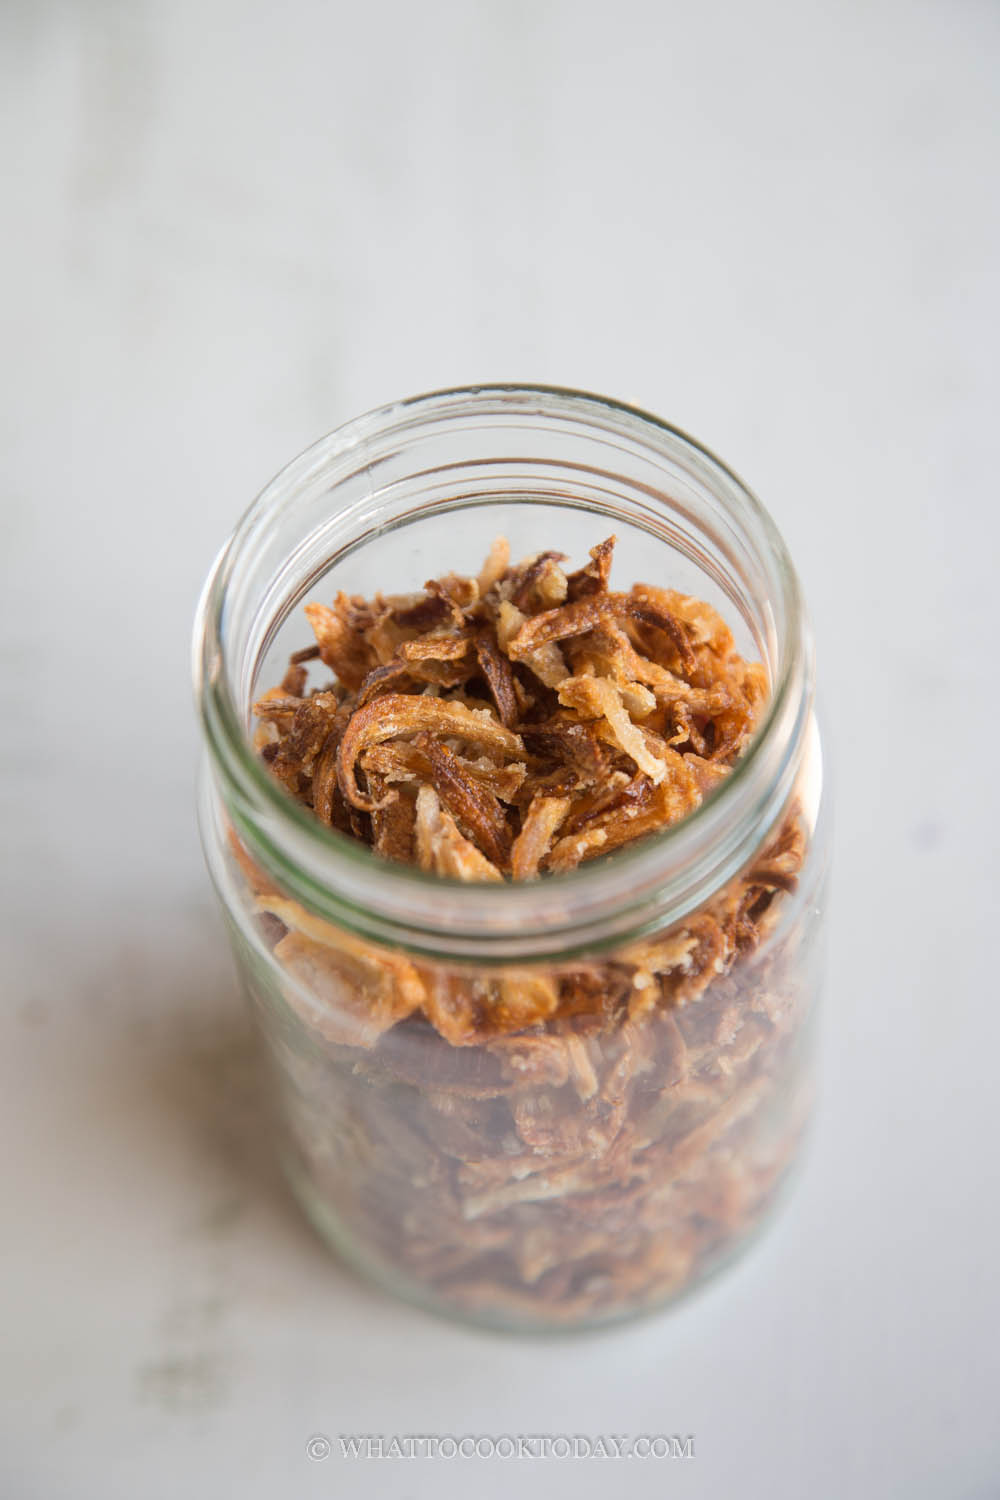 How To Make Asian Crispy Fried Shallots (Bawang Goreng) and Shallot Infused Oil